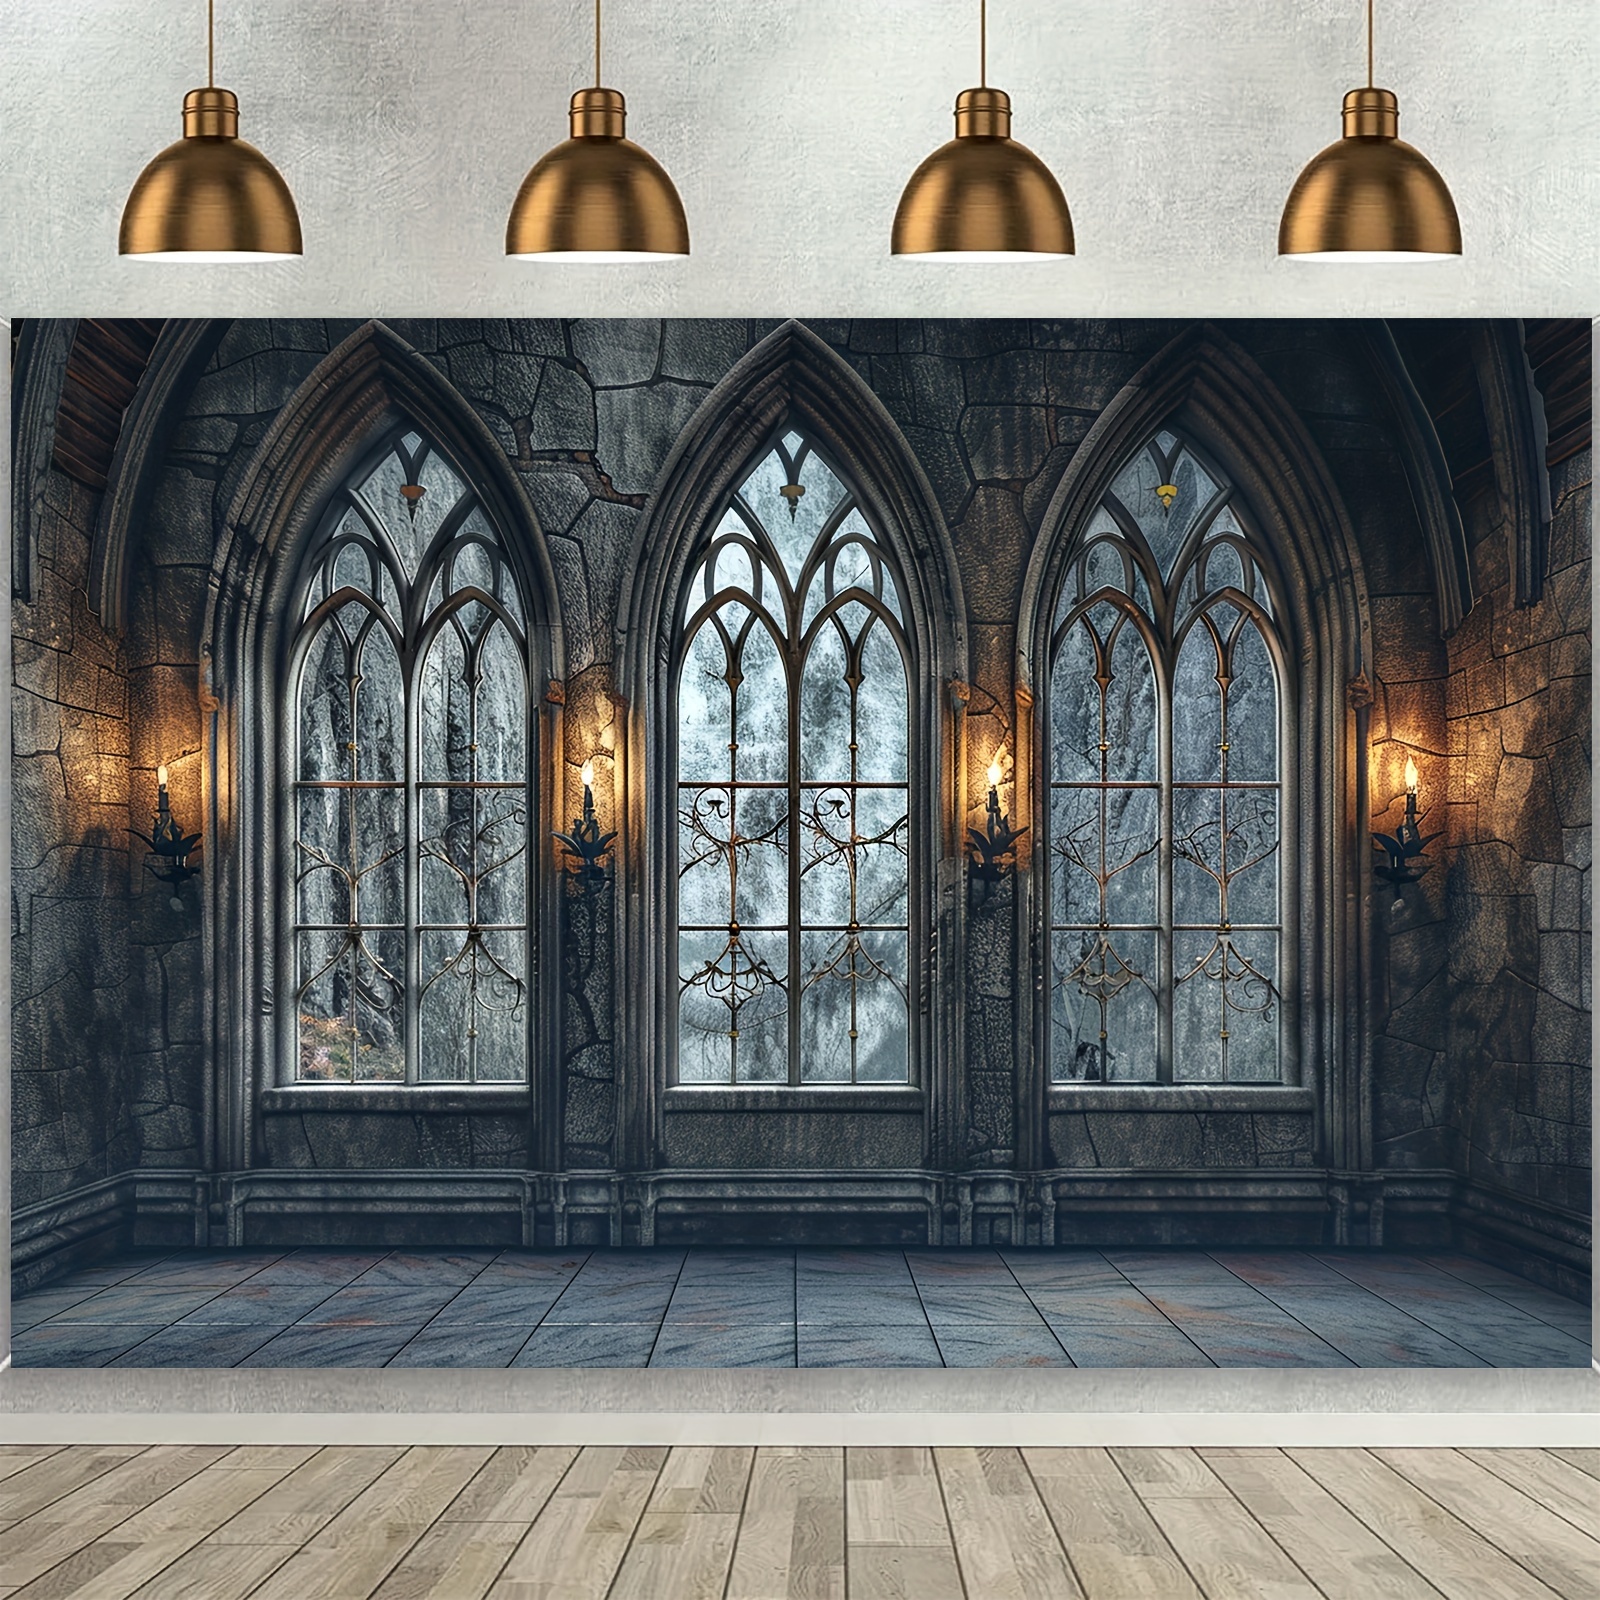 

1pc Vintage Castle Wall Backdrop Photography Stone Arched Door Windows Wall Background Studio Props Party Wedding Pictures Outdoor Photography Banner Decorations